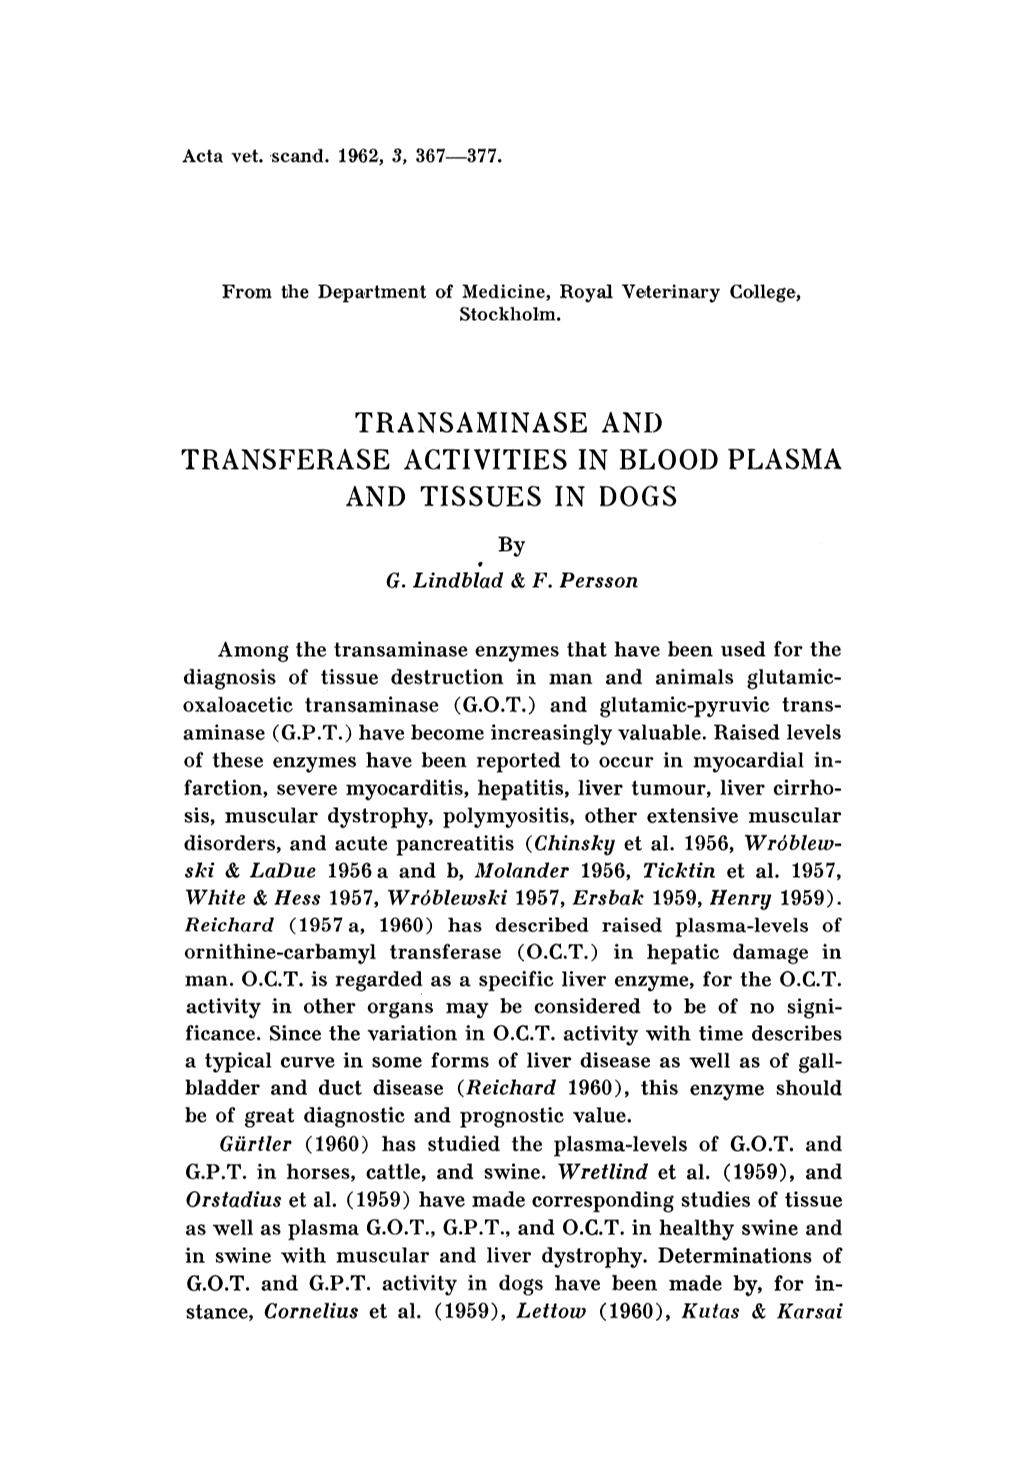 Transaminase and Transferase Activities in Blood Plasma and Tissues in Dogs